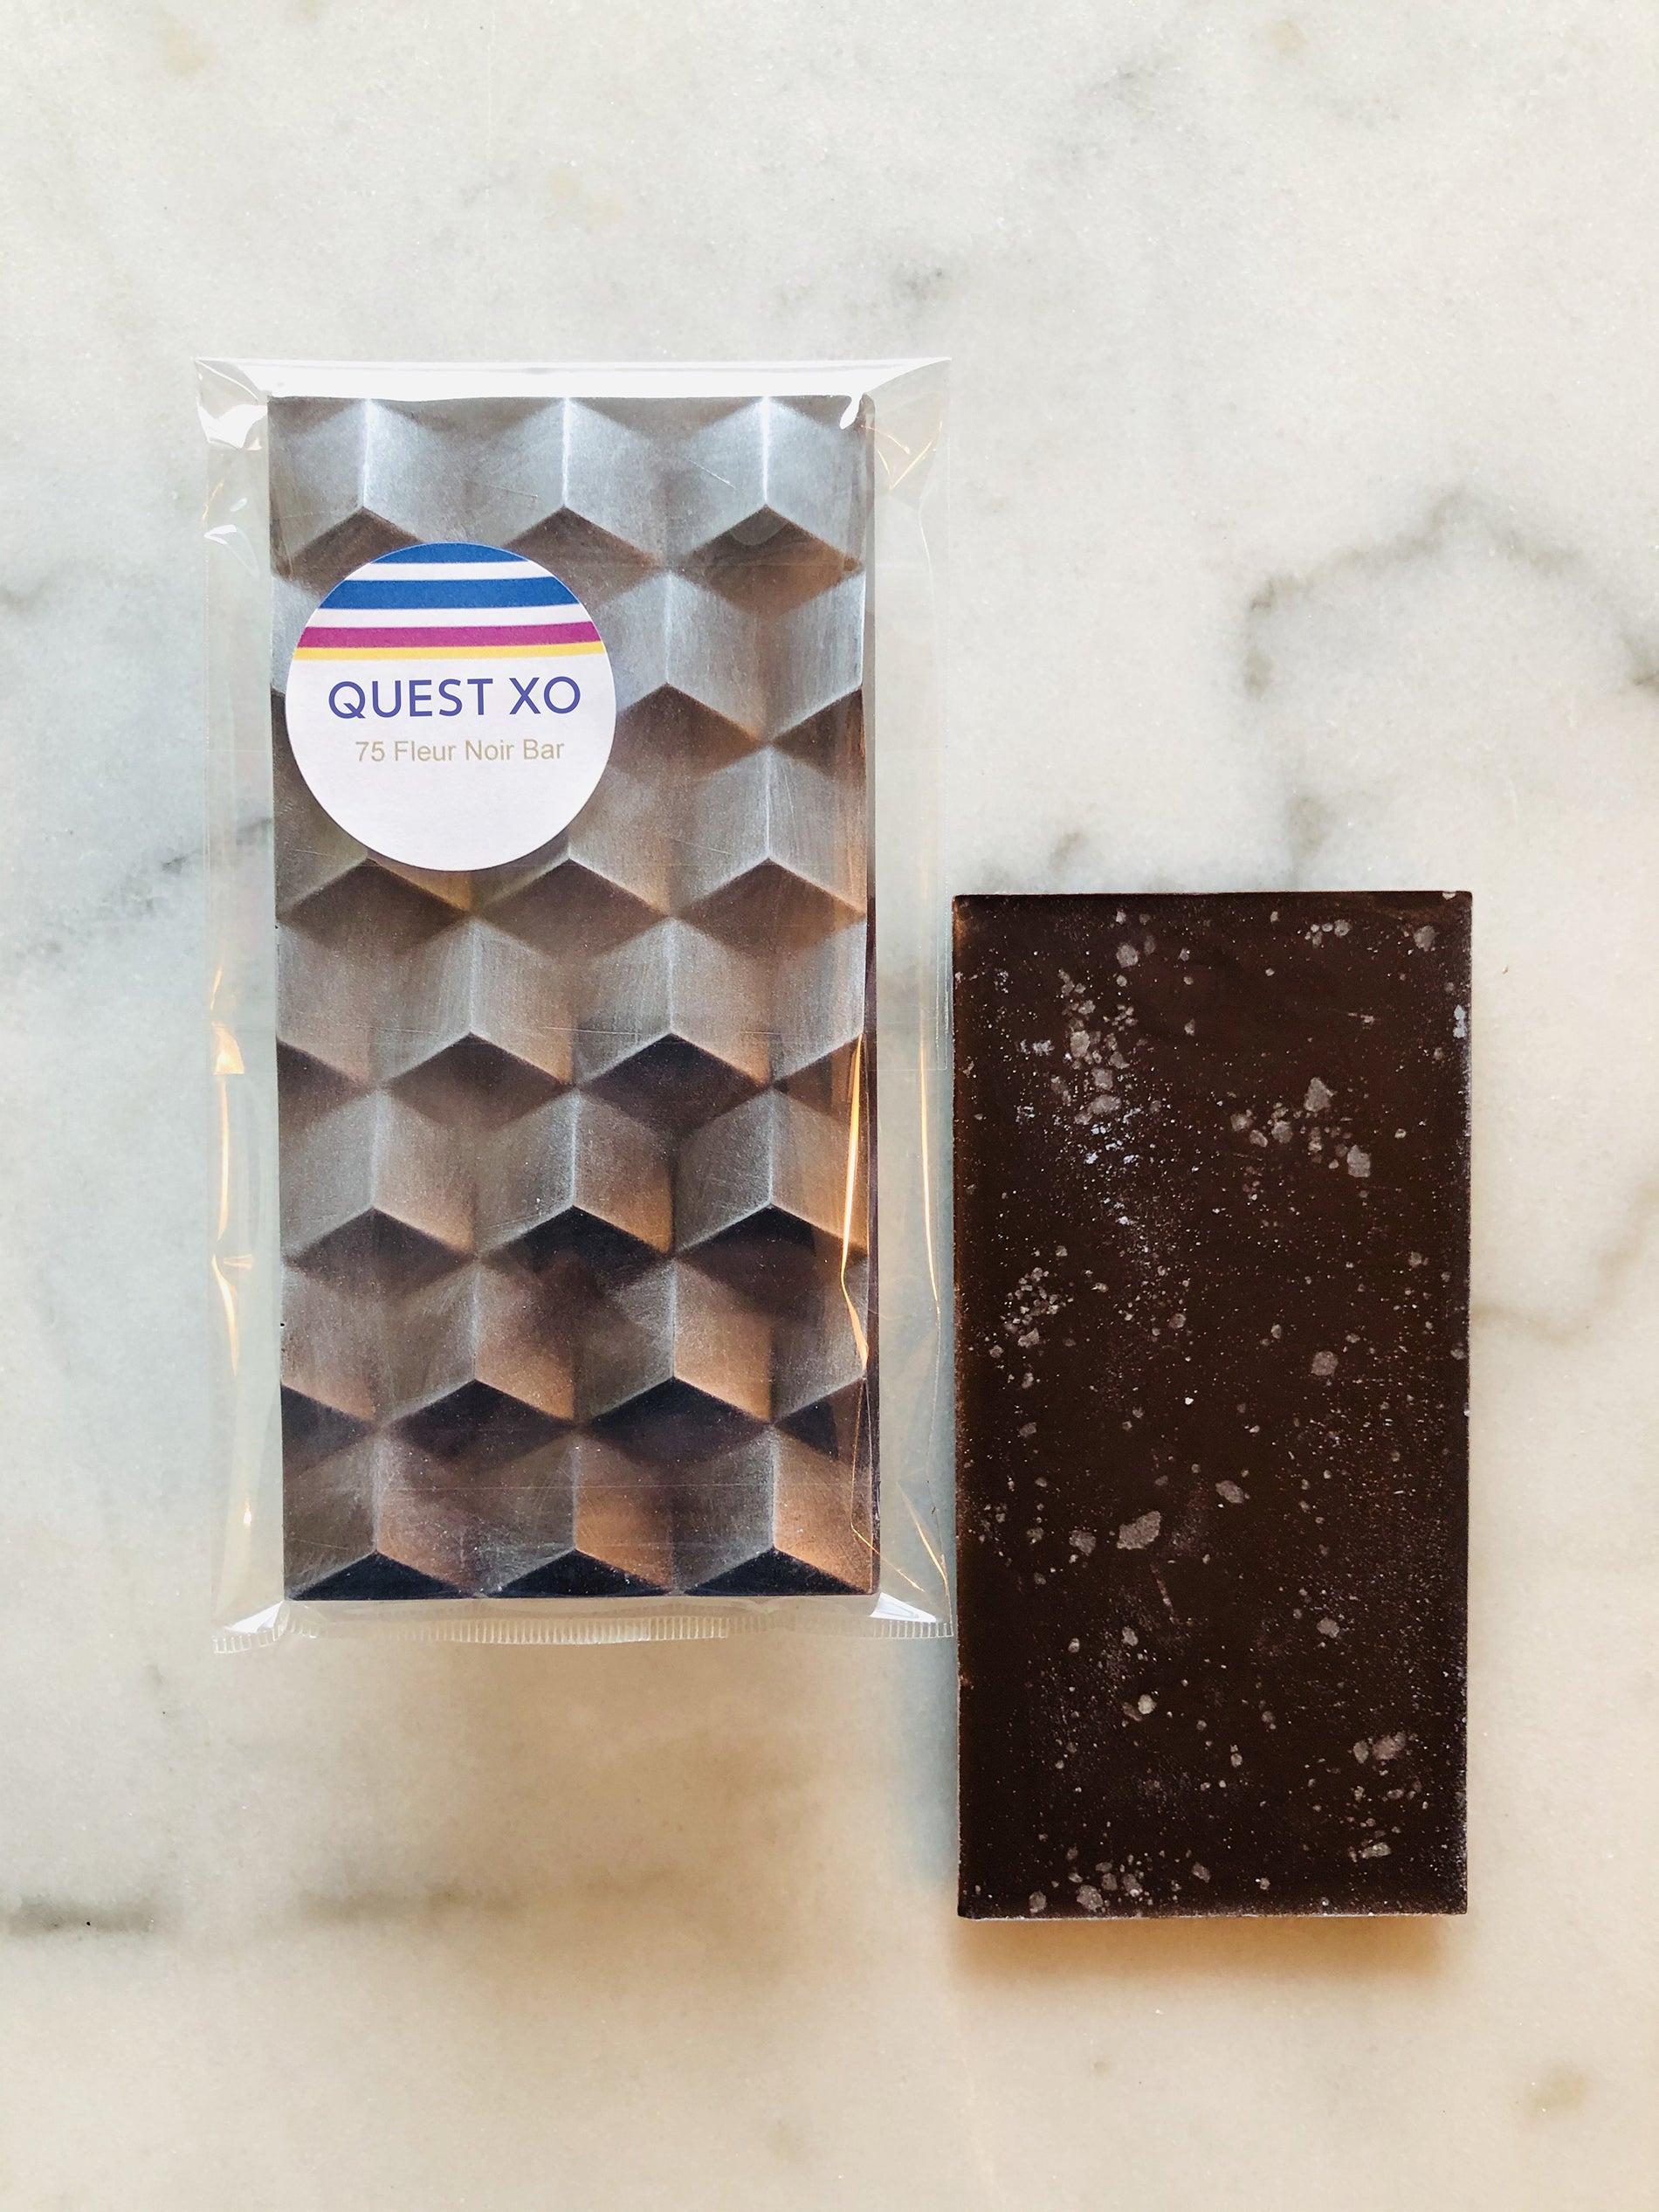 QUEST XO 75 Fleur Noir Bar: Two dark brown chocolate bars with hexagonal shapes wrapped in a transparent plastic with QUEST XO logo placed on a marble background.